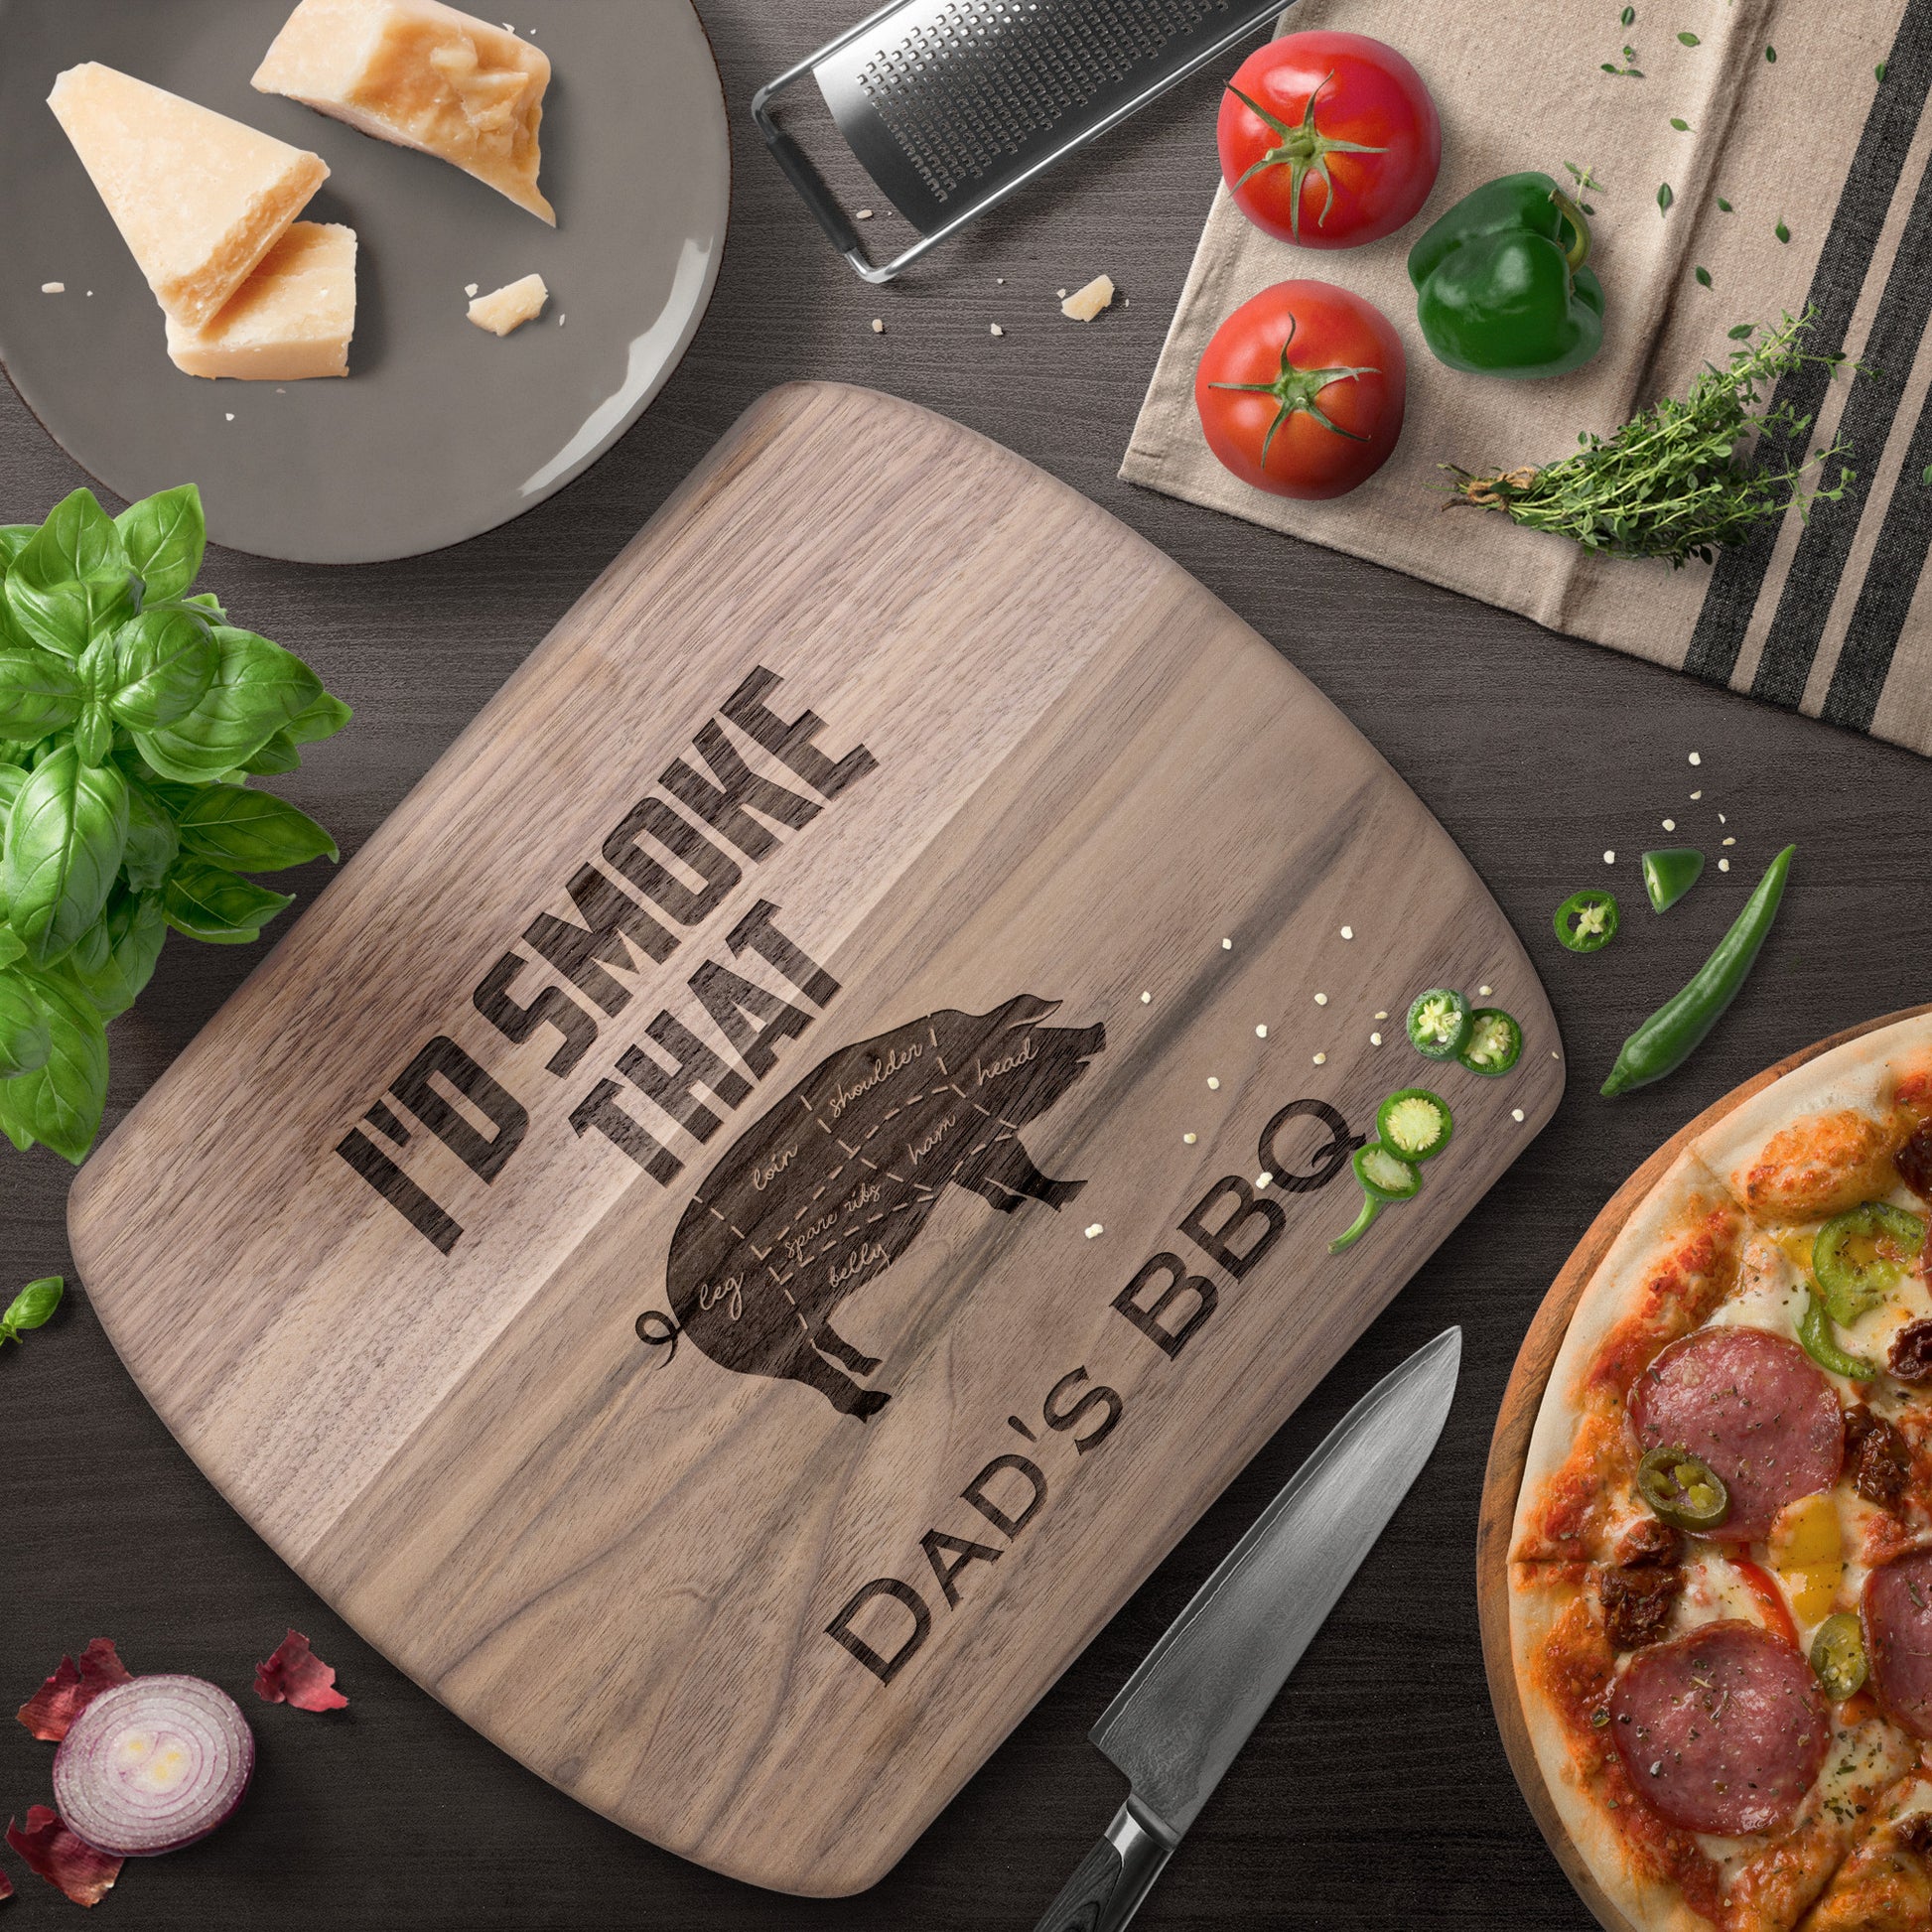 Kitchenware I'd Smoke That Cutting Board, Grill Master, Fathers day Grilling, Gifts for Him, Fathers day gift, Grilling Gift teelaunch